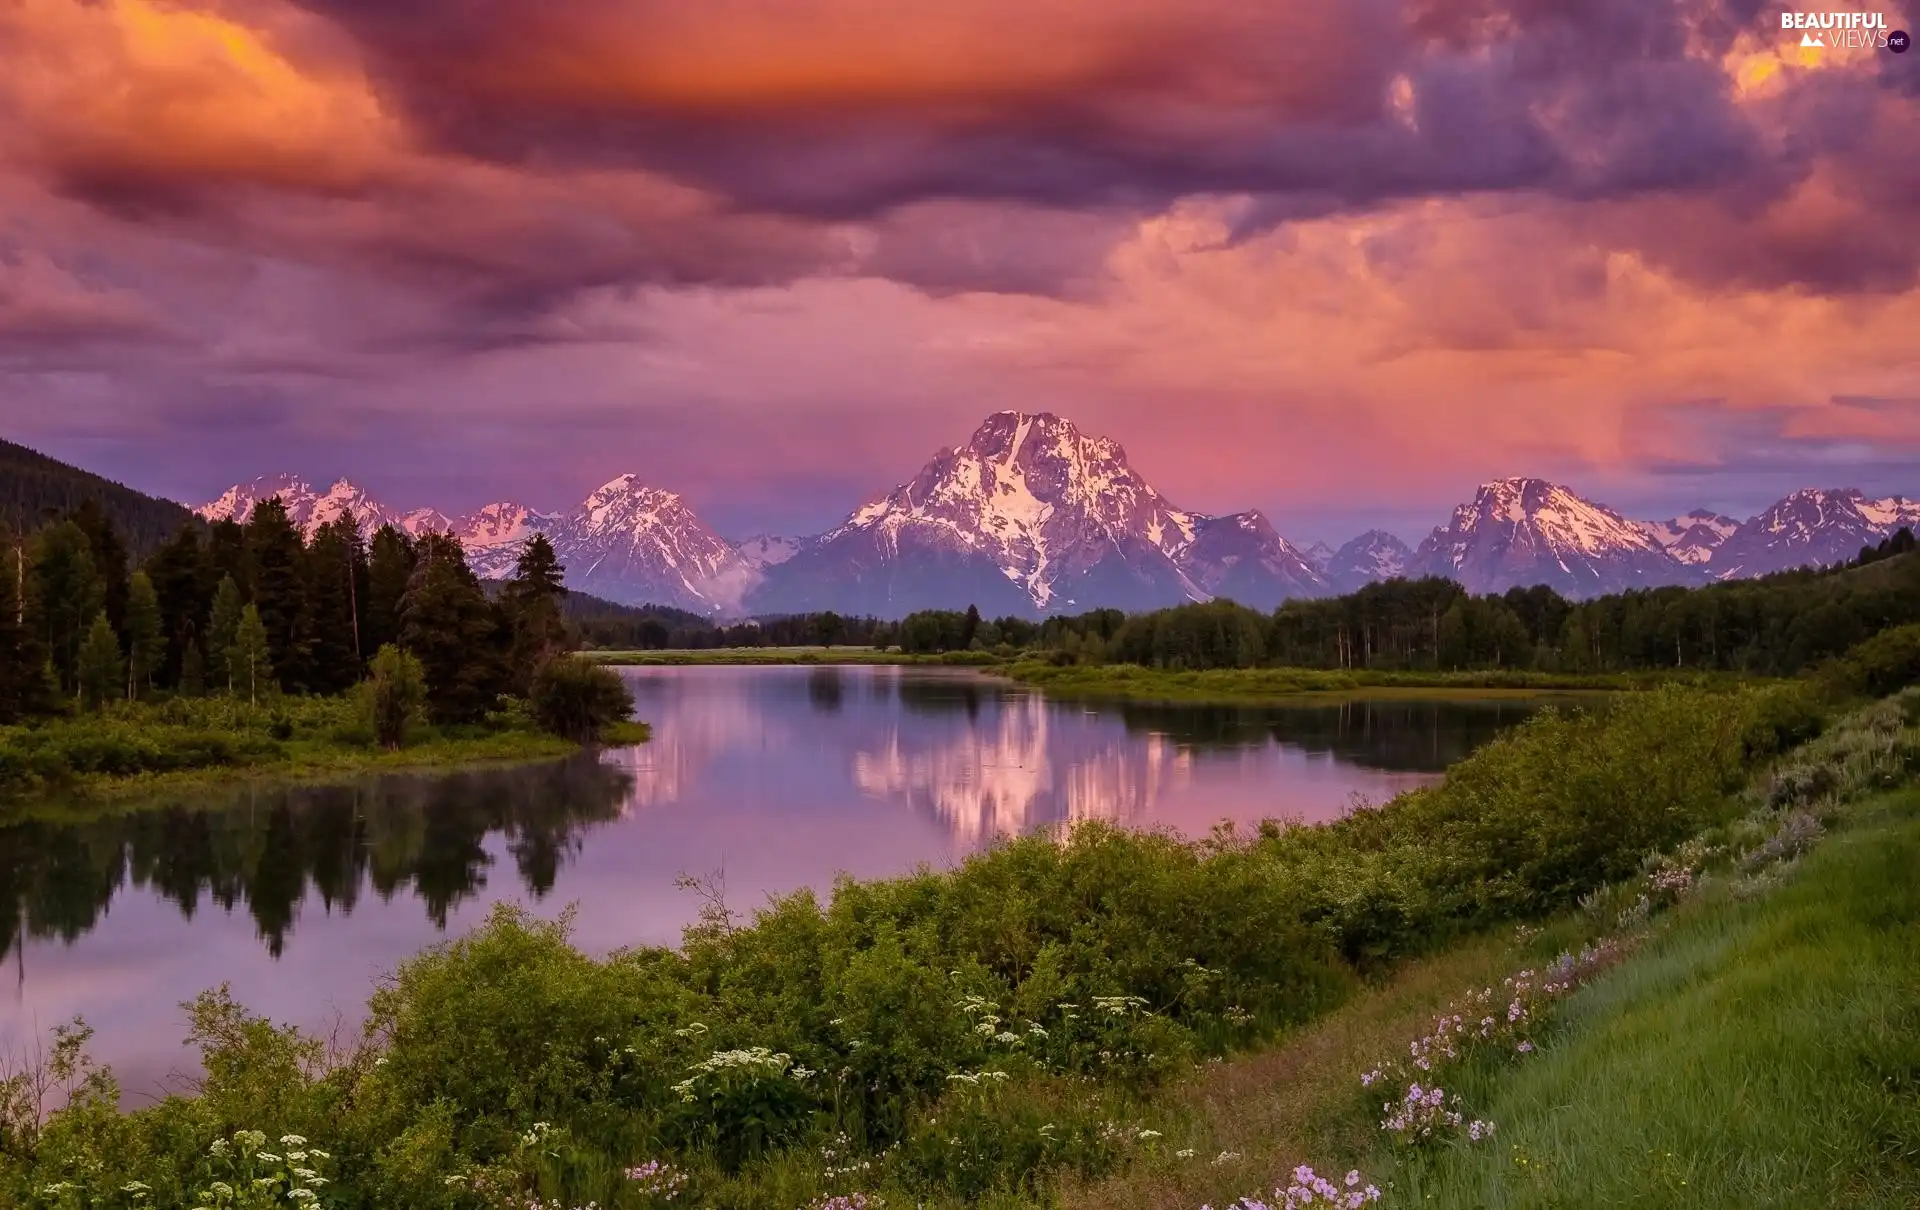 Grand Teton National Park, Snake River, viewes, Mountains, trees, State of Wyoming, The United States, Mount Moran